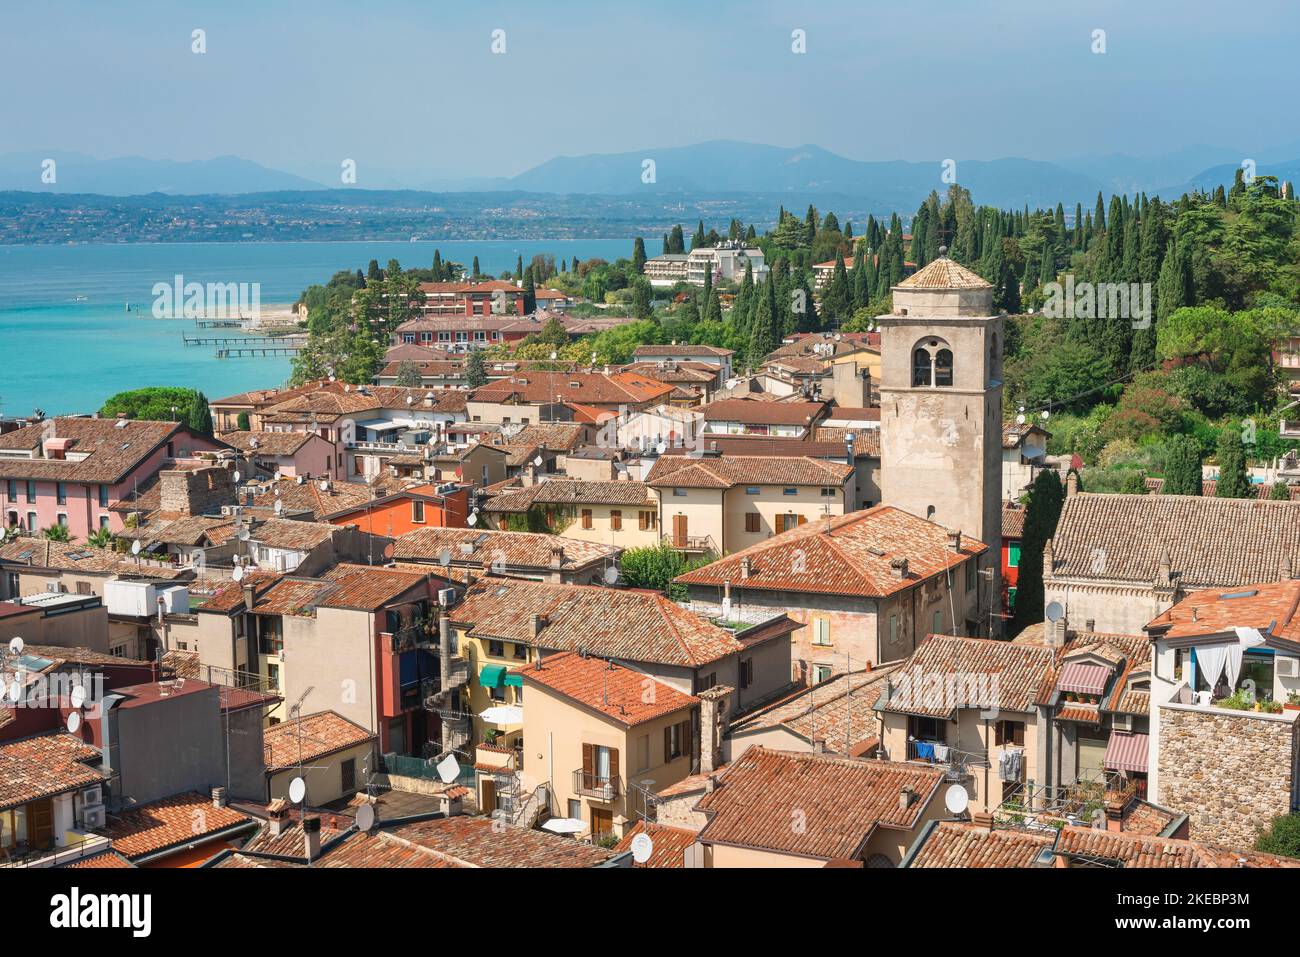 Lake Garda town, view in summer across the rooftops of the scenic lakeside town of Sirmione, Lombardy, Italy Stock Photo